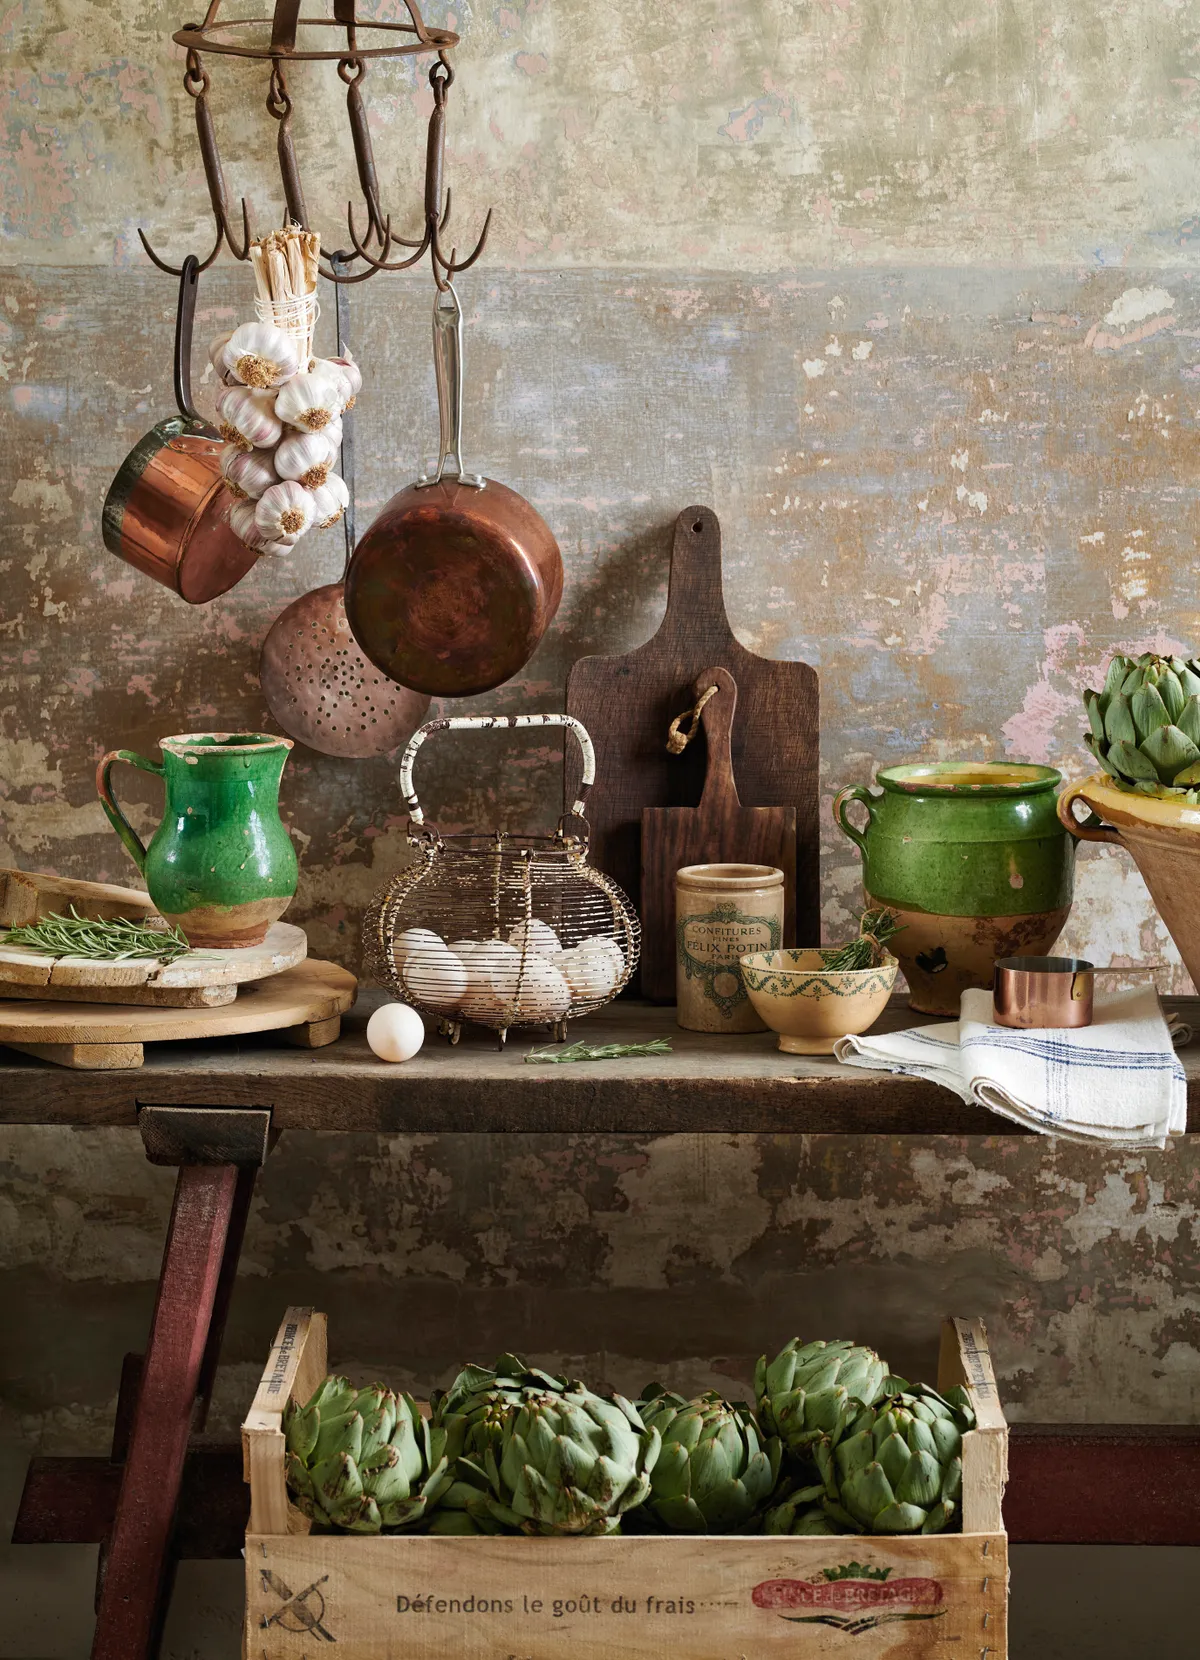 A rustic table topped with confit pots, Confit pots in bright green or yellow glazes, linen tablecloths, plenty of rustic wooden boards and strings of garlic